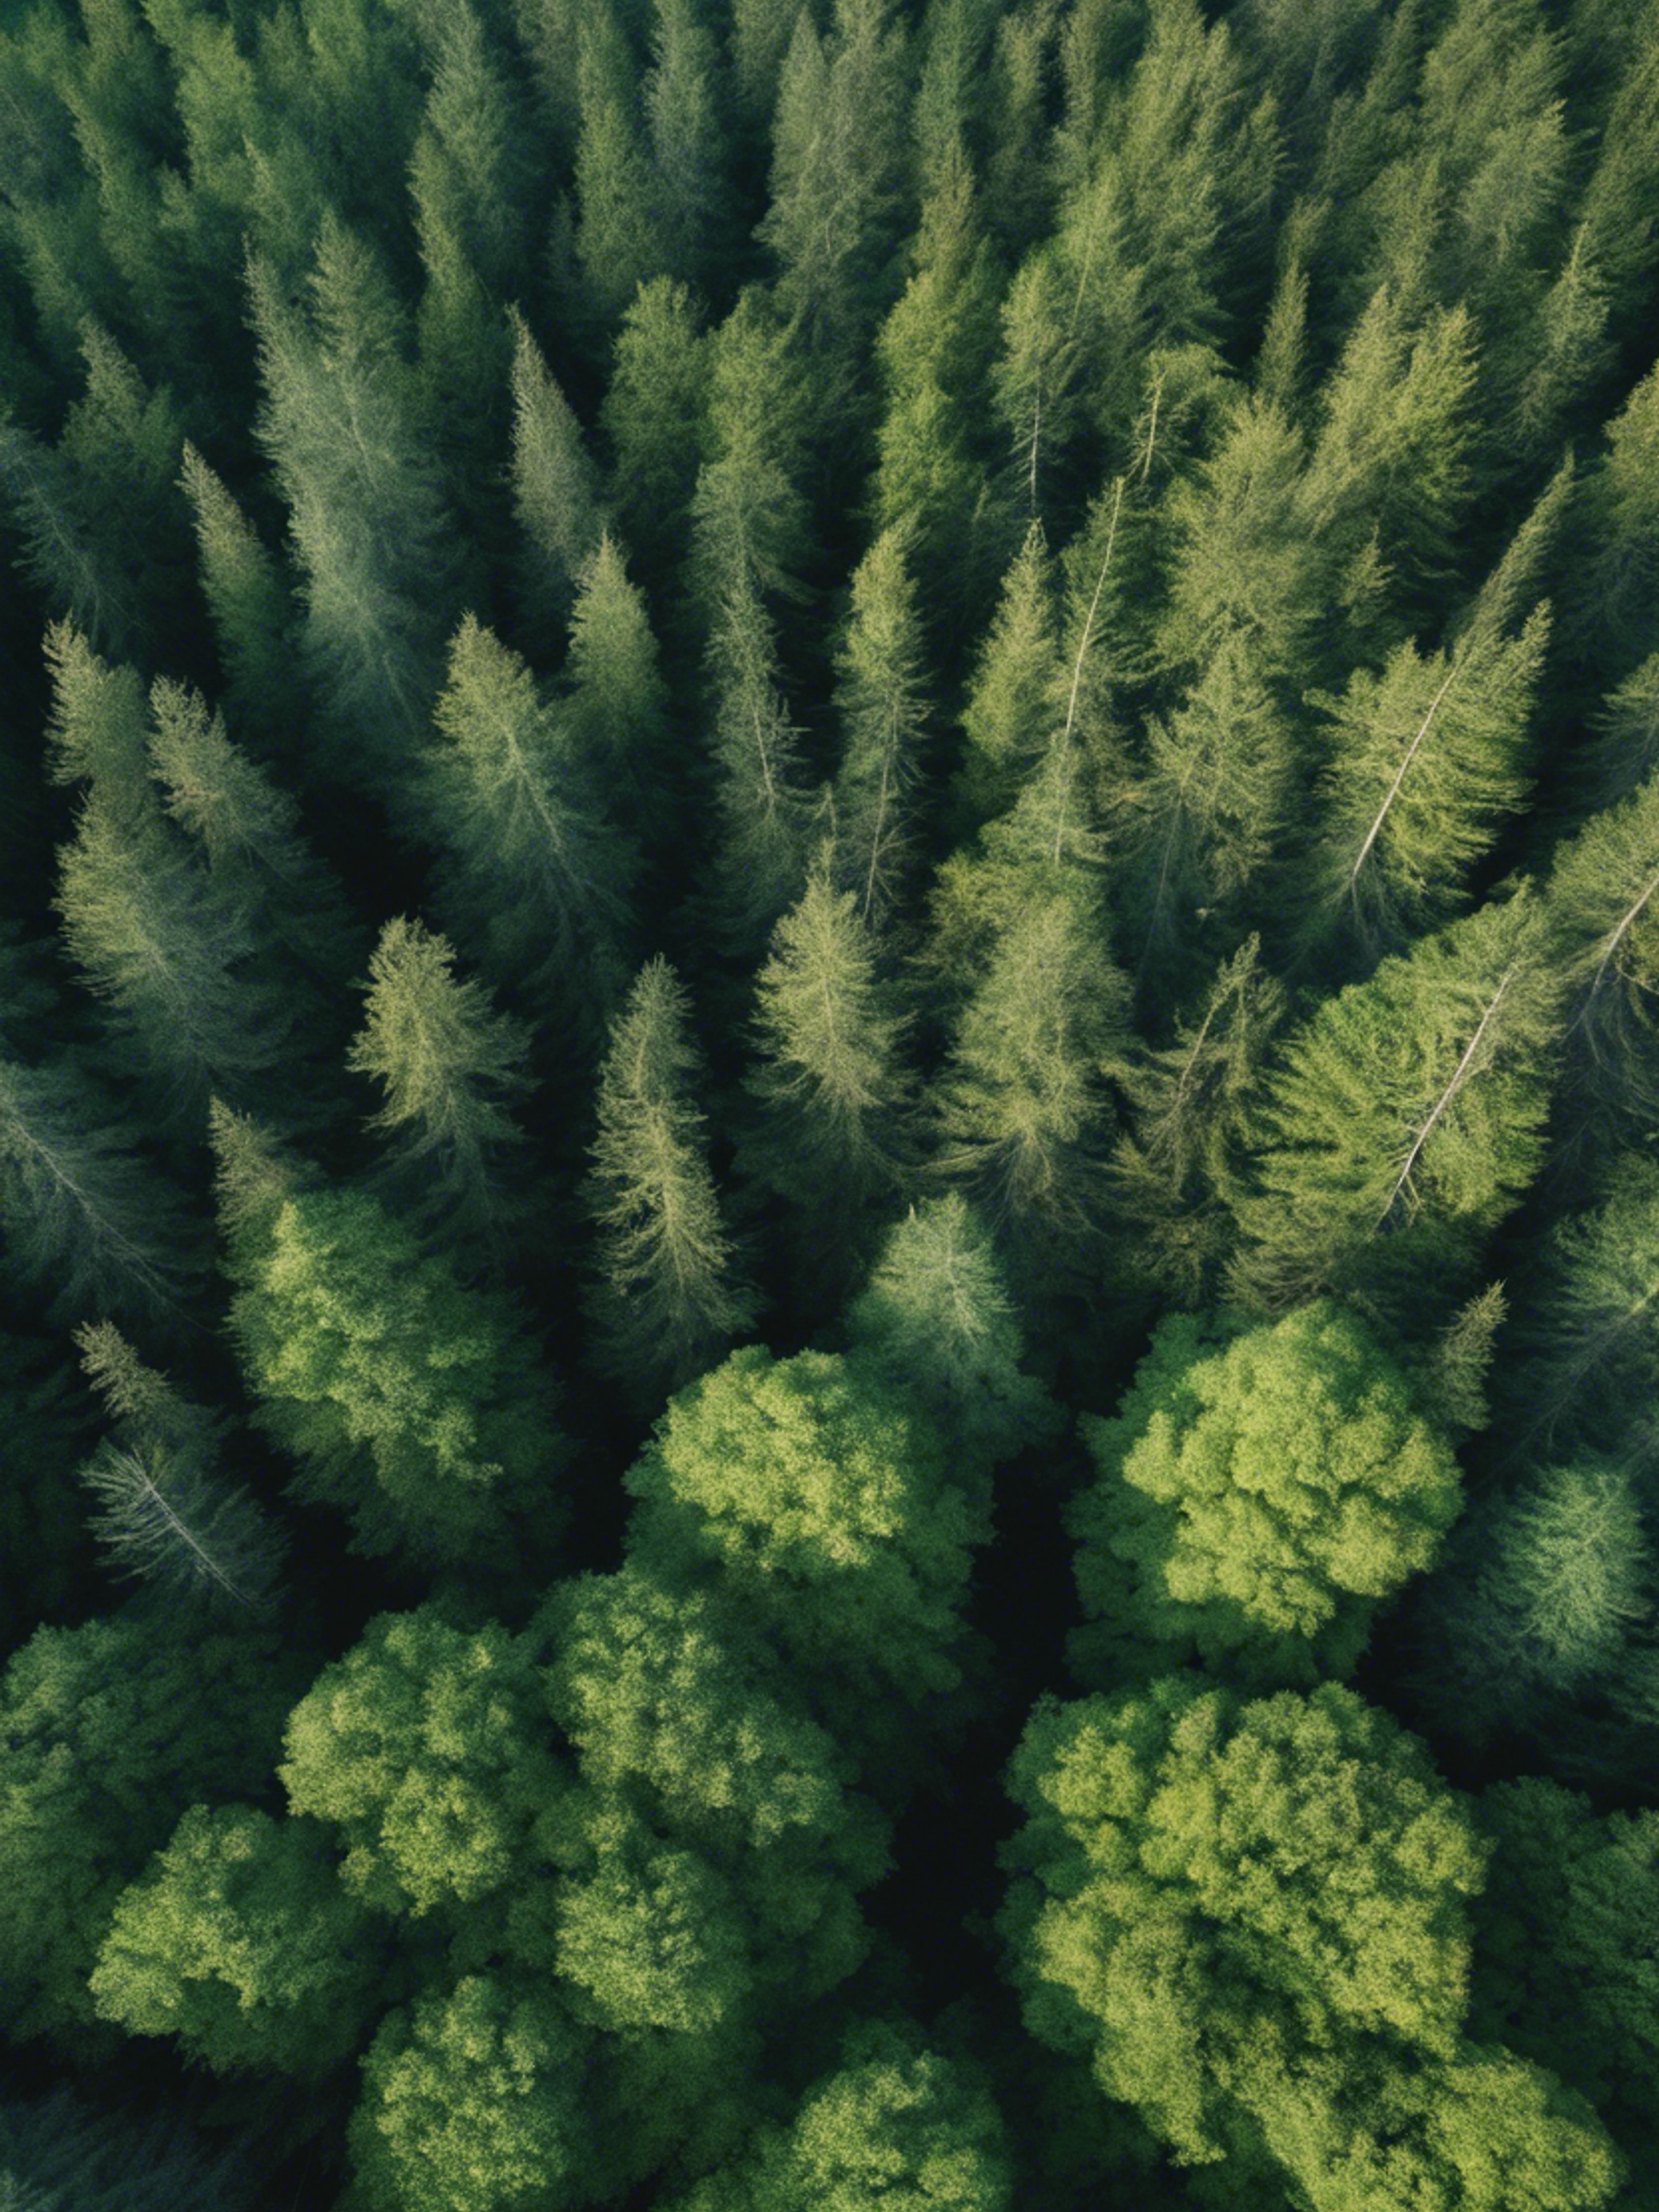 An aerial view of a summer forest, showing different shades of cool green. Wallpaper[0f690078d26f4d7895b4]